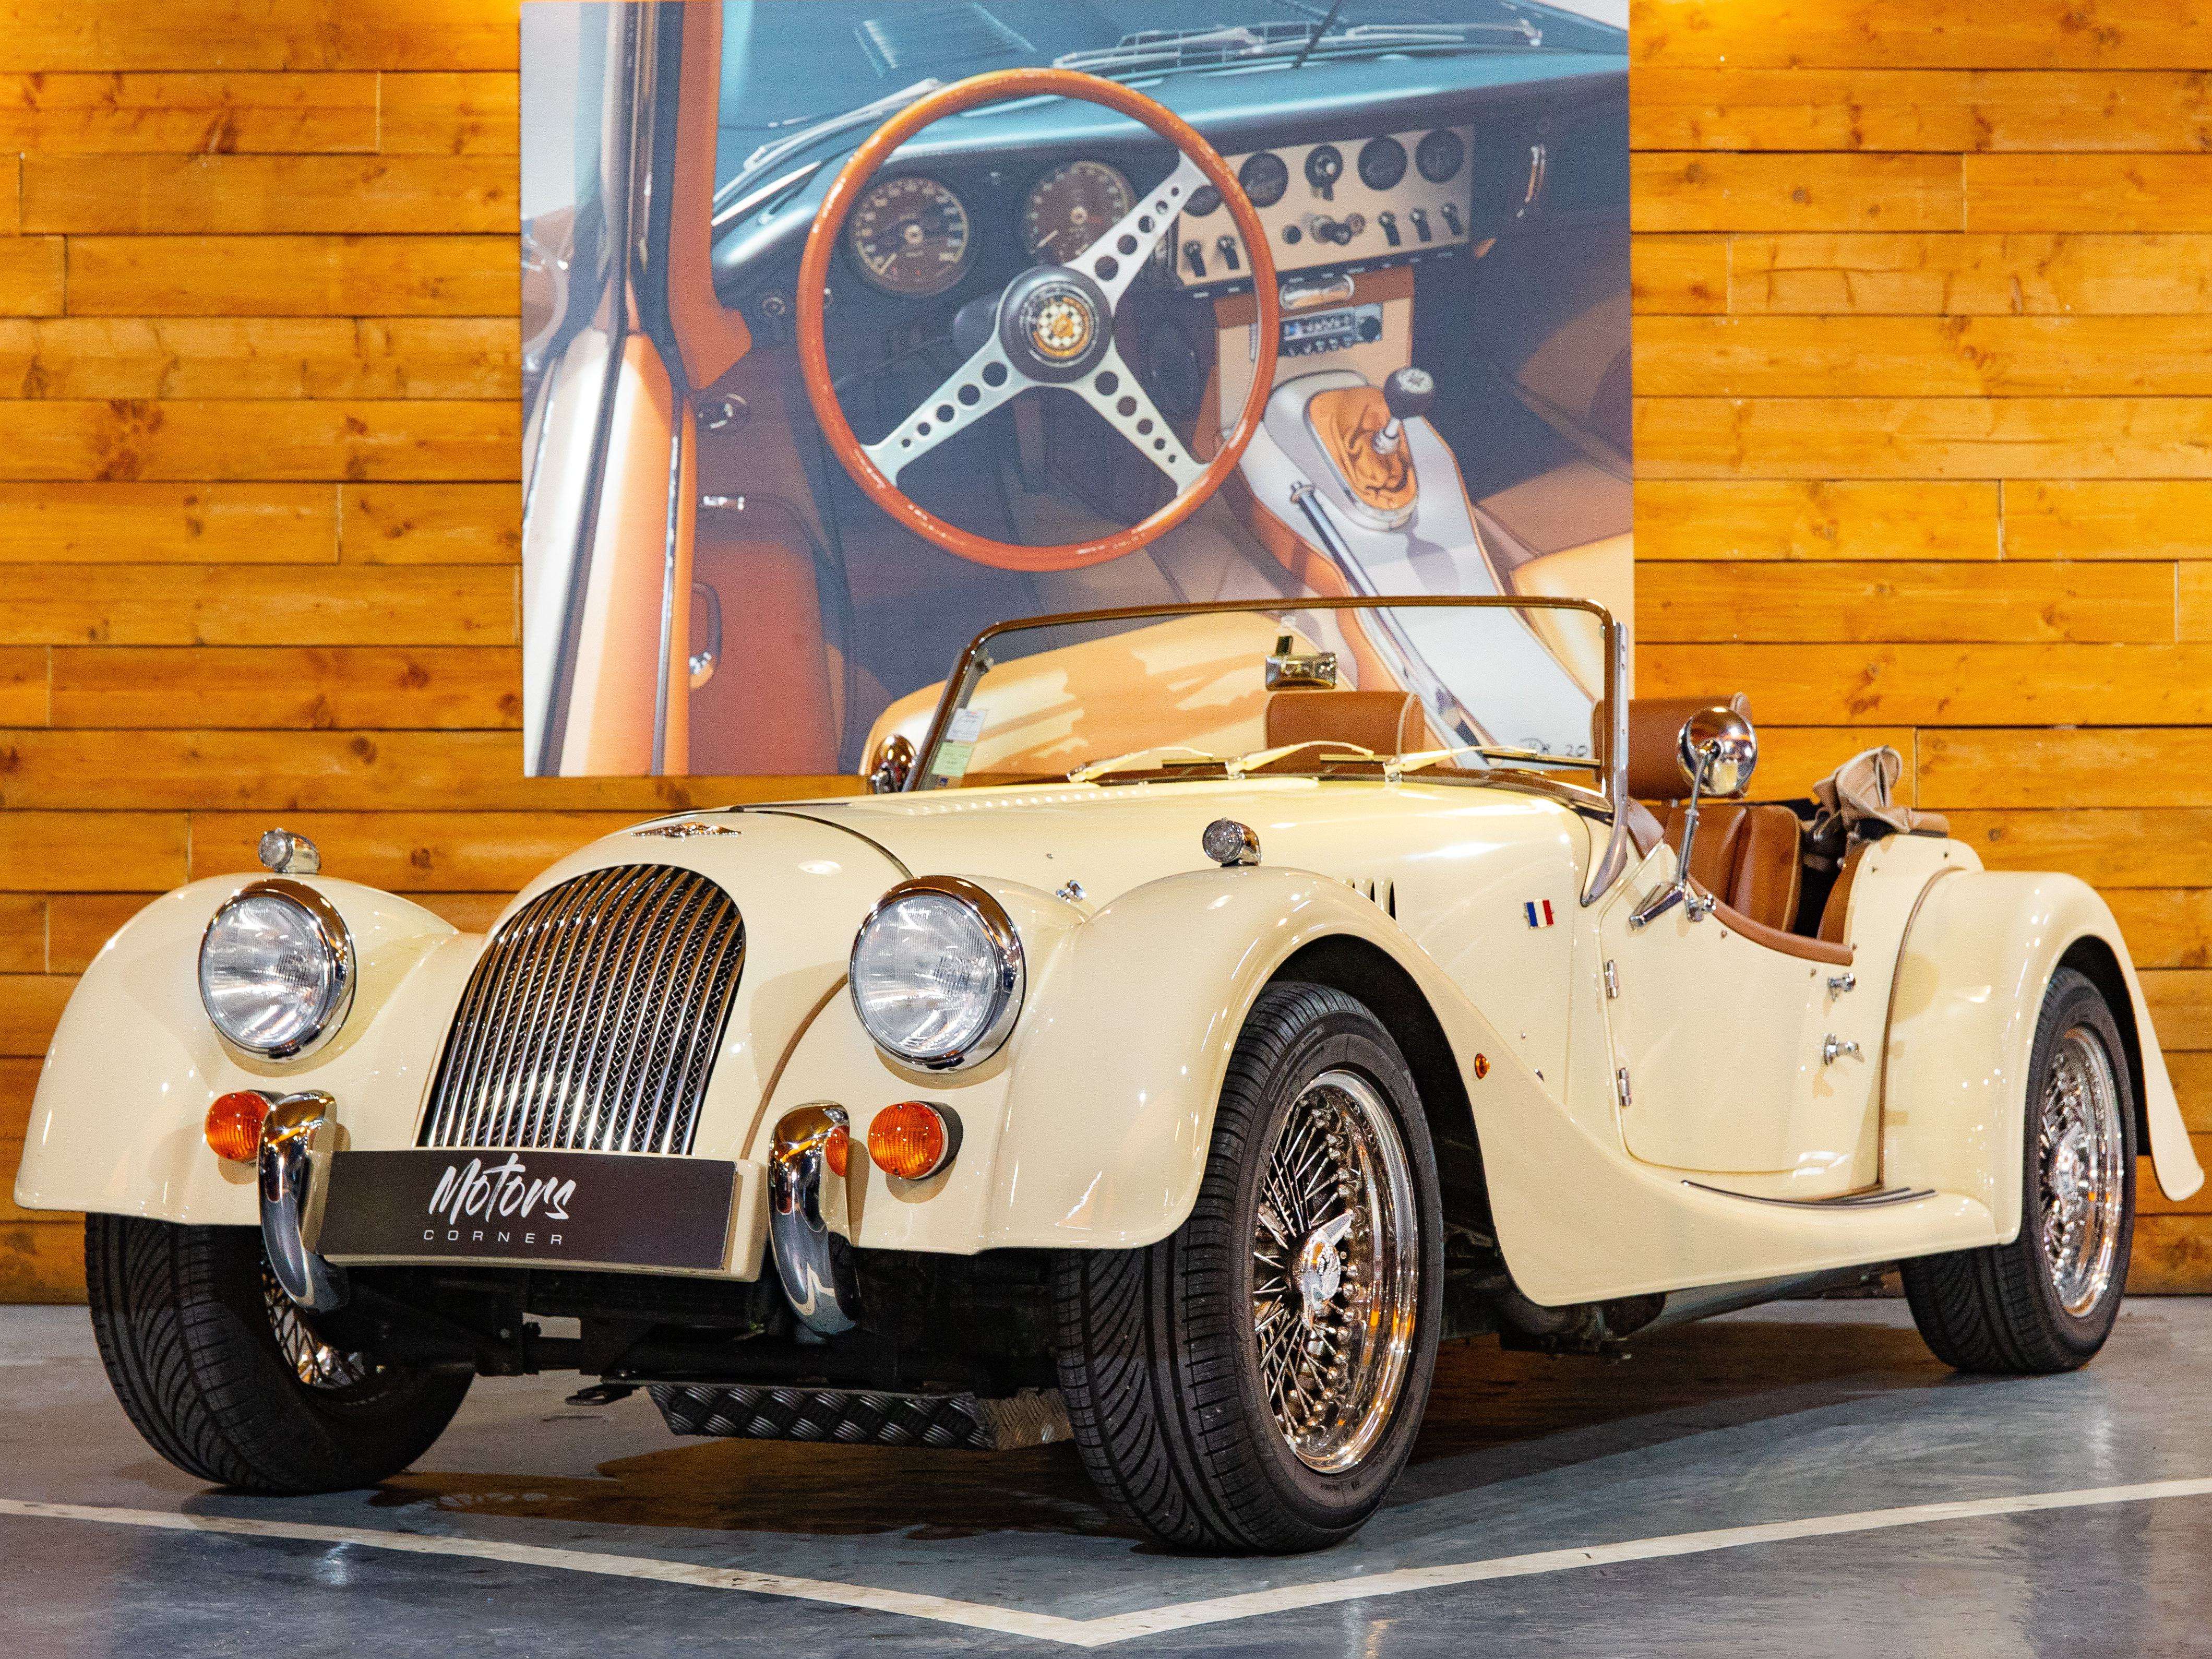 Morgan 4/4 Convertible in Beige used in Nice for € 67,990.-